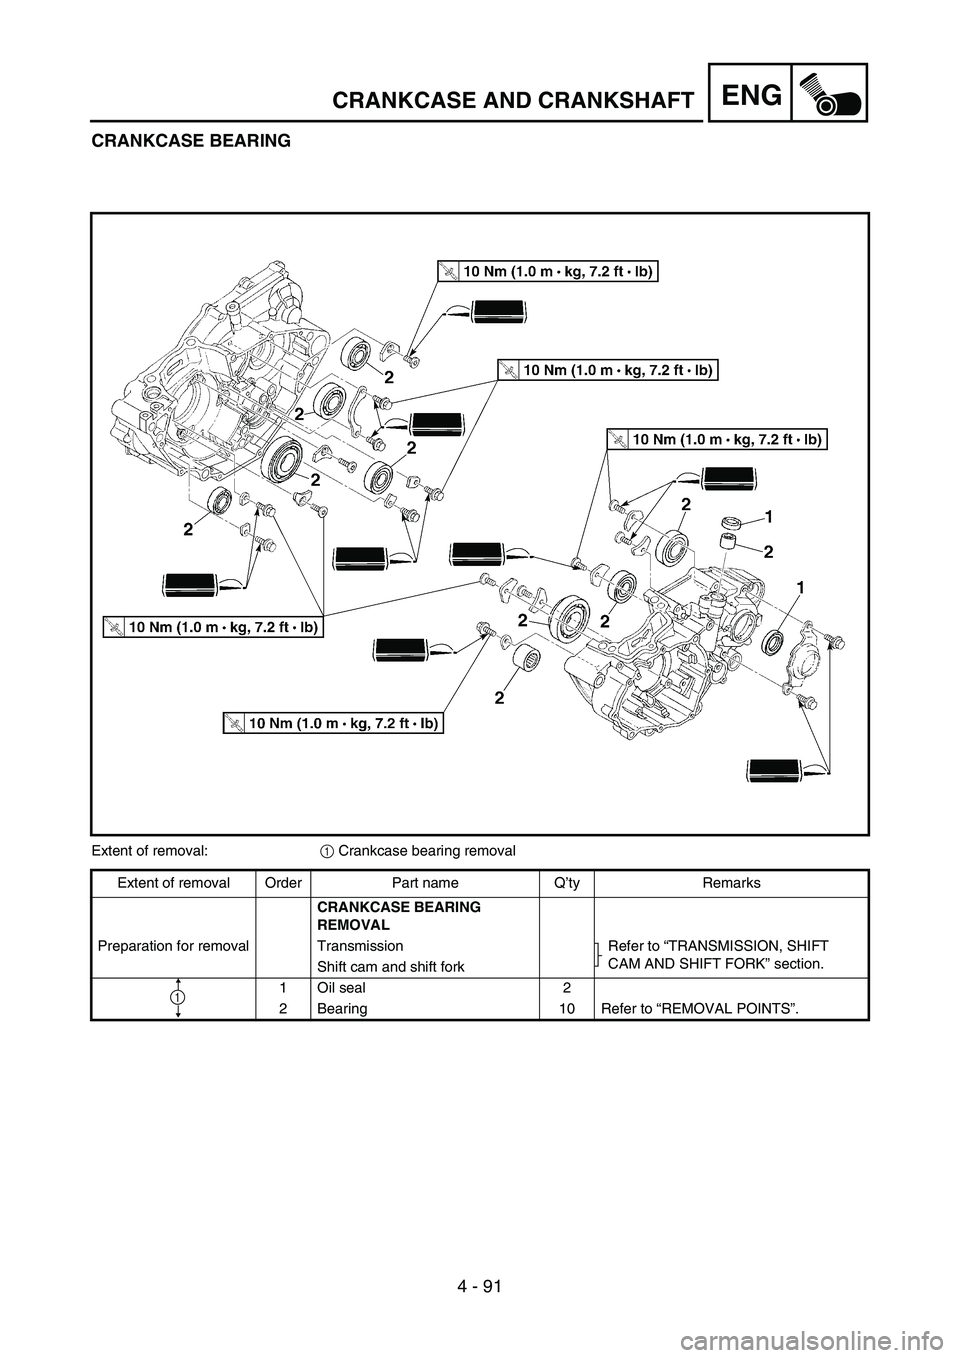 YAMAHA YZ250F 2007  Owners Manual 4 - 91
ENGCRANKCASE AND CRANKSHAFT
CRANKCASE BEARING
Extent of removal:
1 Crankcase bearing removal
Extent of removal Order Part name Q’ty Remarks
CRANKCASE BEARING 
REMOVAL
Preparation for removal 